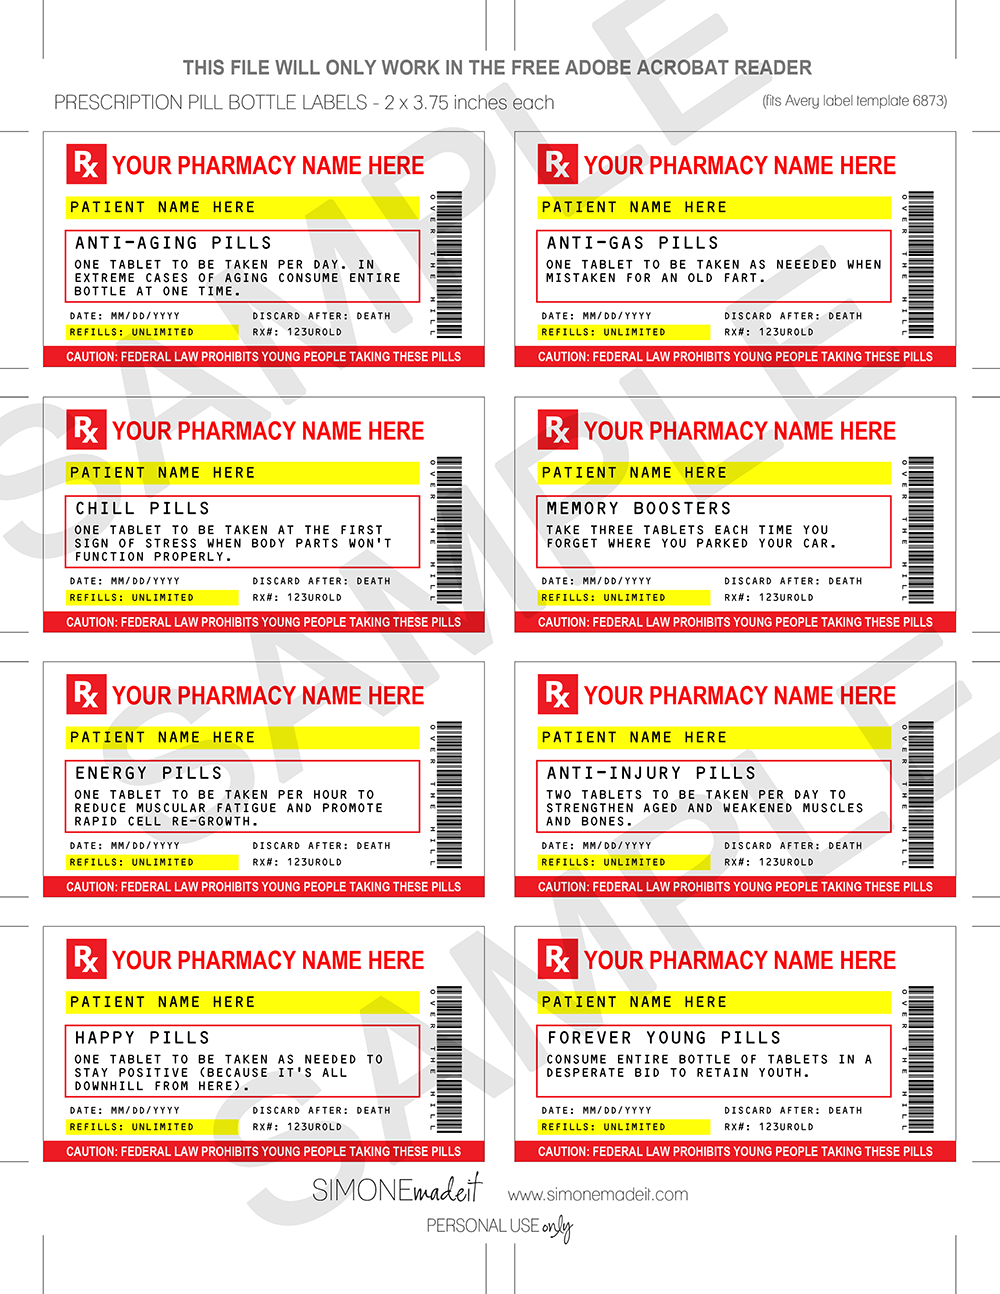 Gag Prescription Labels template for Old Age Pills | Birthday Party Gift or Favors | Funny Gift | Over the Hill | Practical Joke | Candy Medicine | Doctor, Nurse, Pharmacist or Medical Gift | 40th 50th 60th 70th Birthday Gift | DIY Fake Pharmacy Rx Prescription Label | 13 Dram | INSTANT DOWNLOAD via giftsbysimonemadeit.com